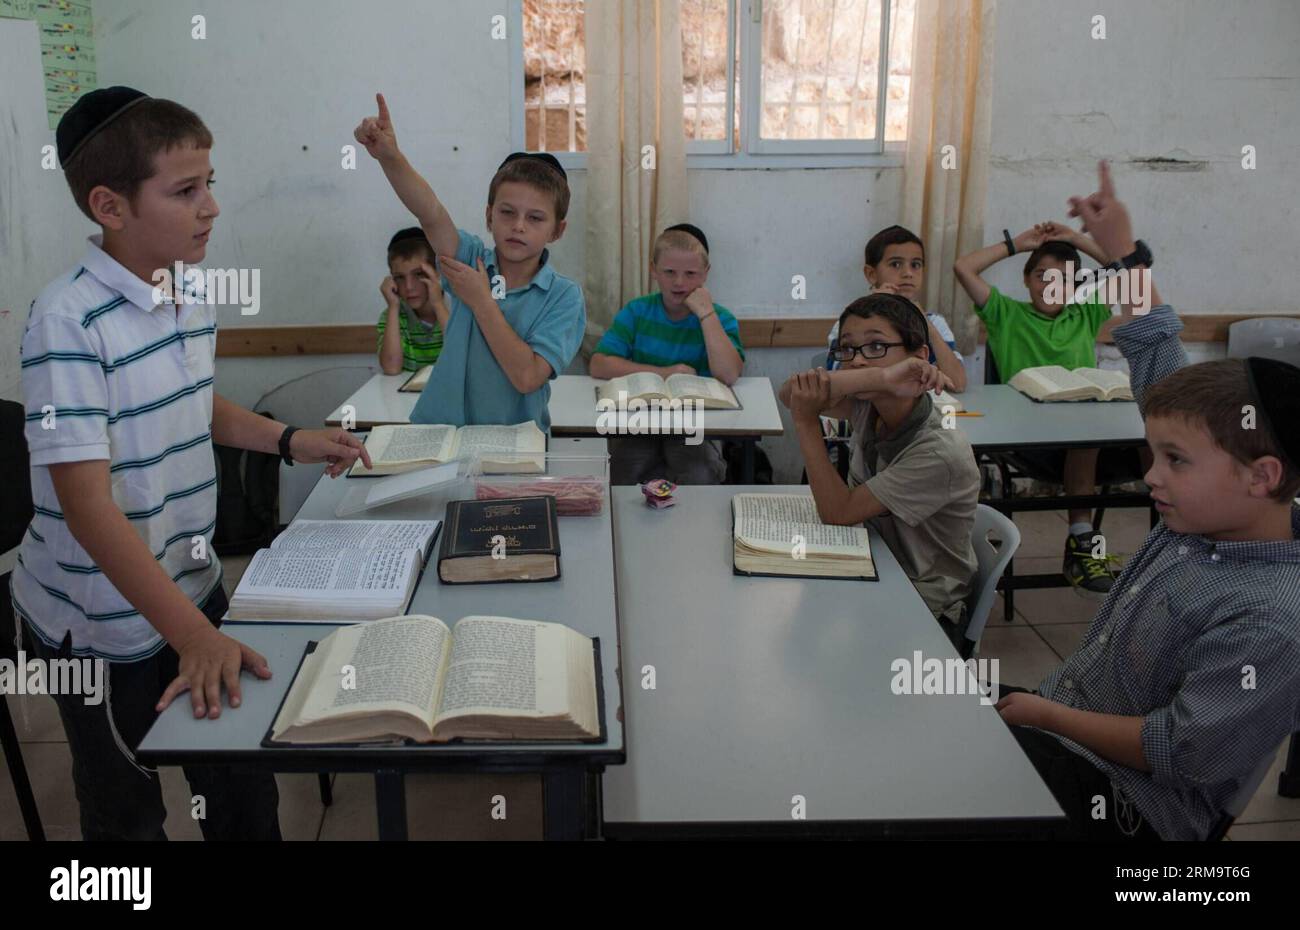 Tzviel Noyman (1st L) asks a question when leading a class of Jewish religion at Torat Moshe elementary school in Beit Shemesh, about 20 km from Jerusalem, on May 29, 2014. Tzviel Noyman is an Israeli Ultra-Orthodox boy in a family with six children, three boys and three girls. He is ten years old this year and a grade three pupil of Torat Moshe elementary school, which is only opened to Jewish children. Tzviel has eight classes each day, including Hebrew, English, mathematics and Jewish religion, which has four classes each day including Talmud, Mishnah and Gemara. Tzviel likes the religion c Stock Photo